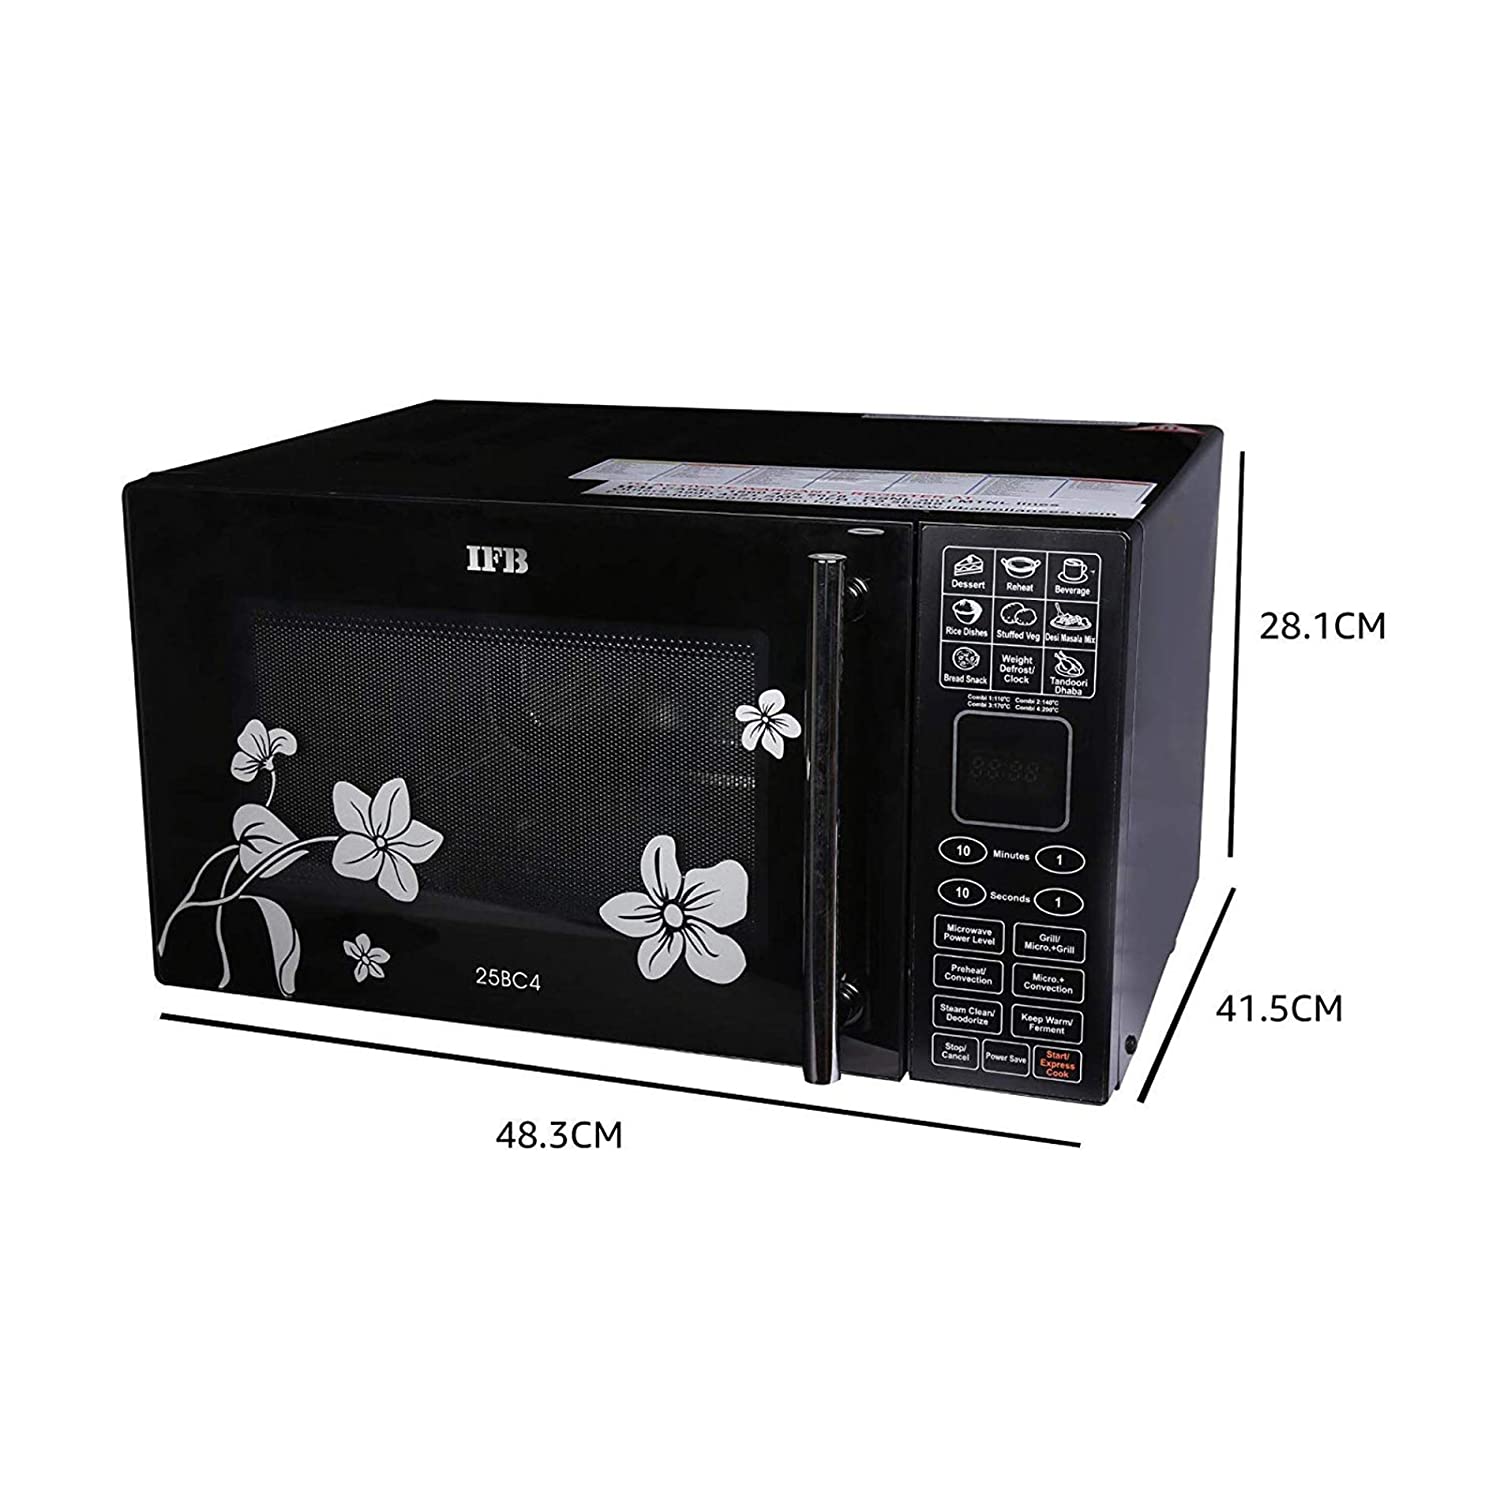 IFB 25BC4 25 L Convection Microwave Oven